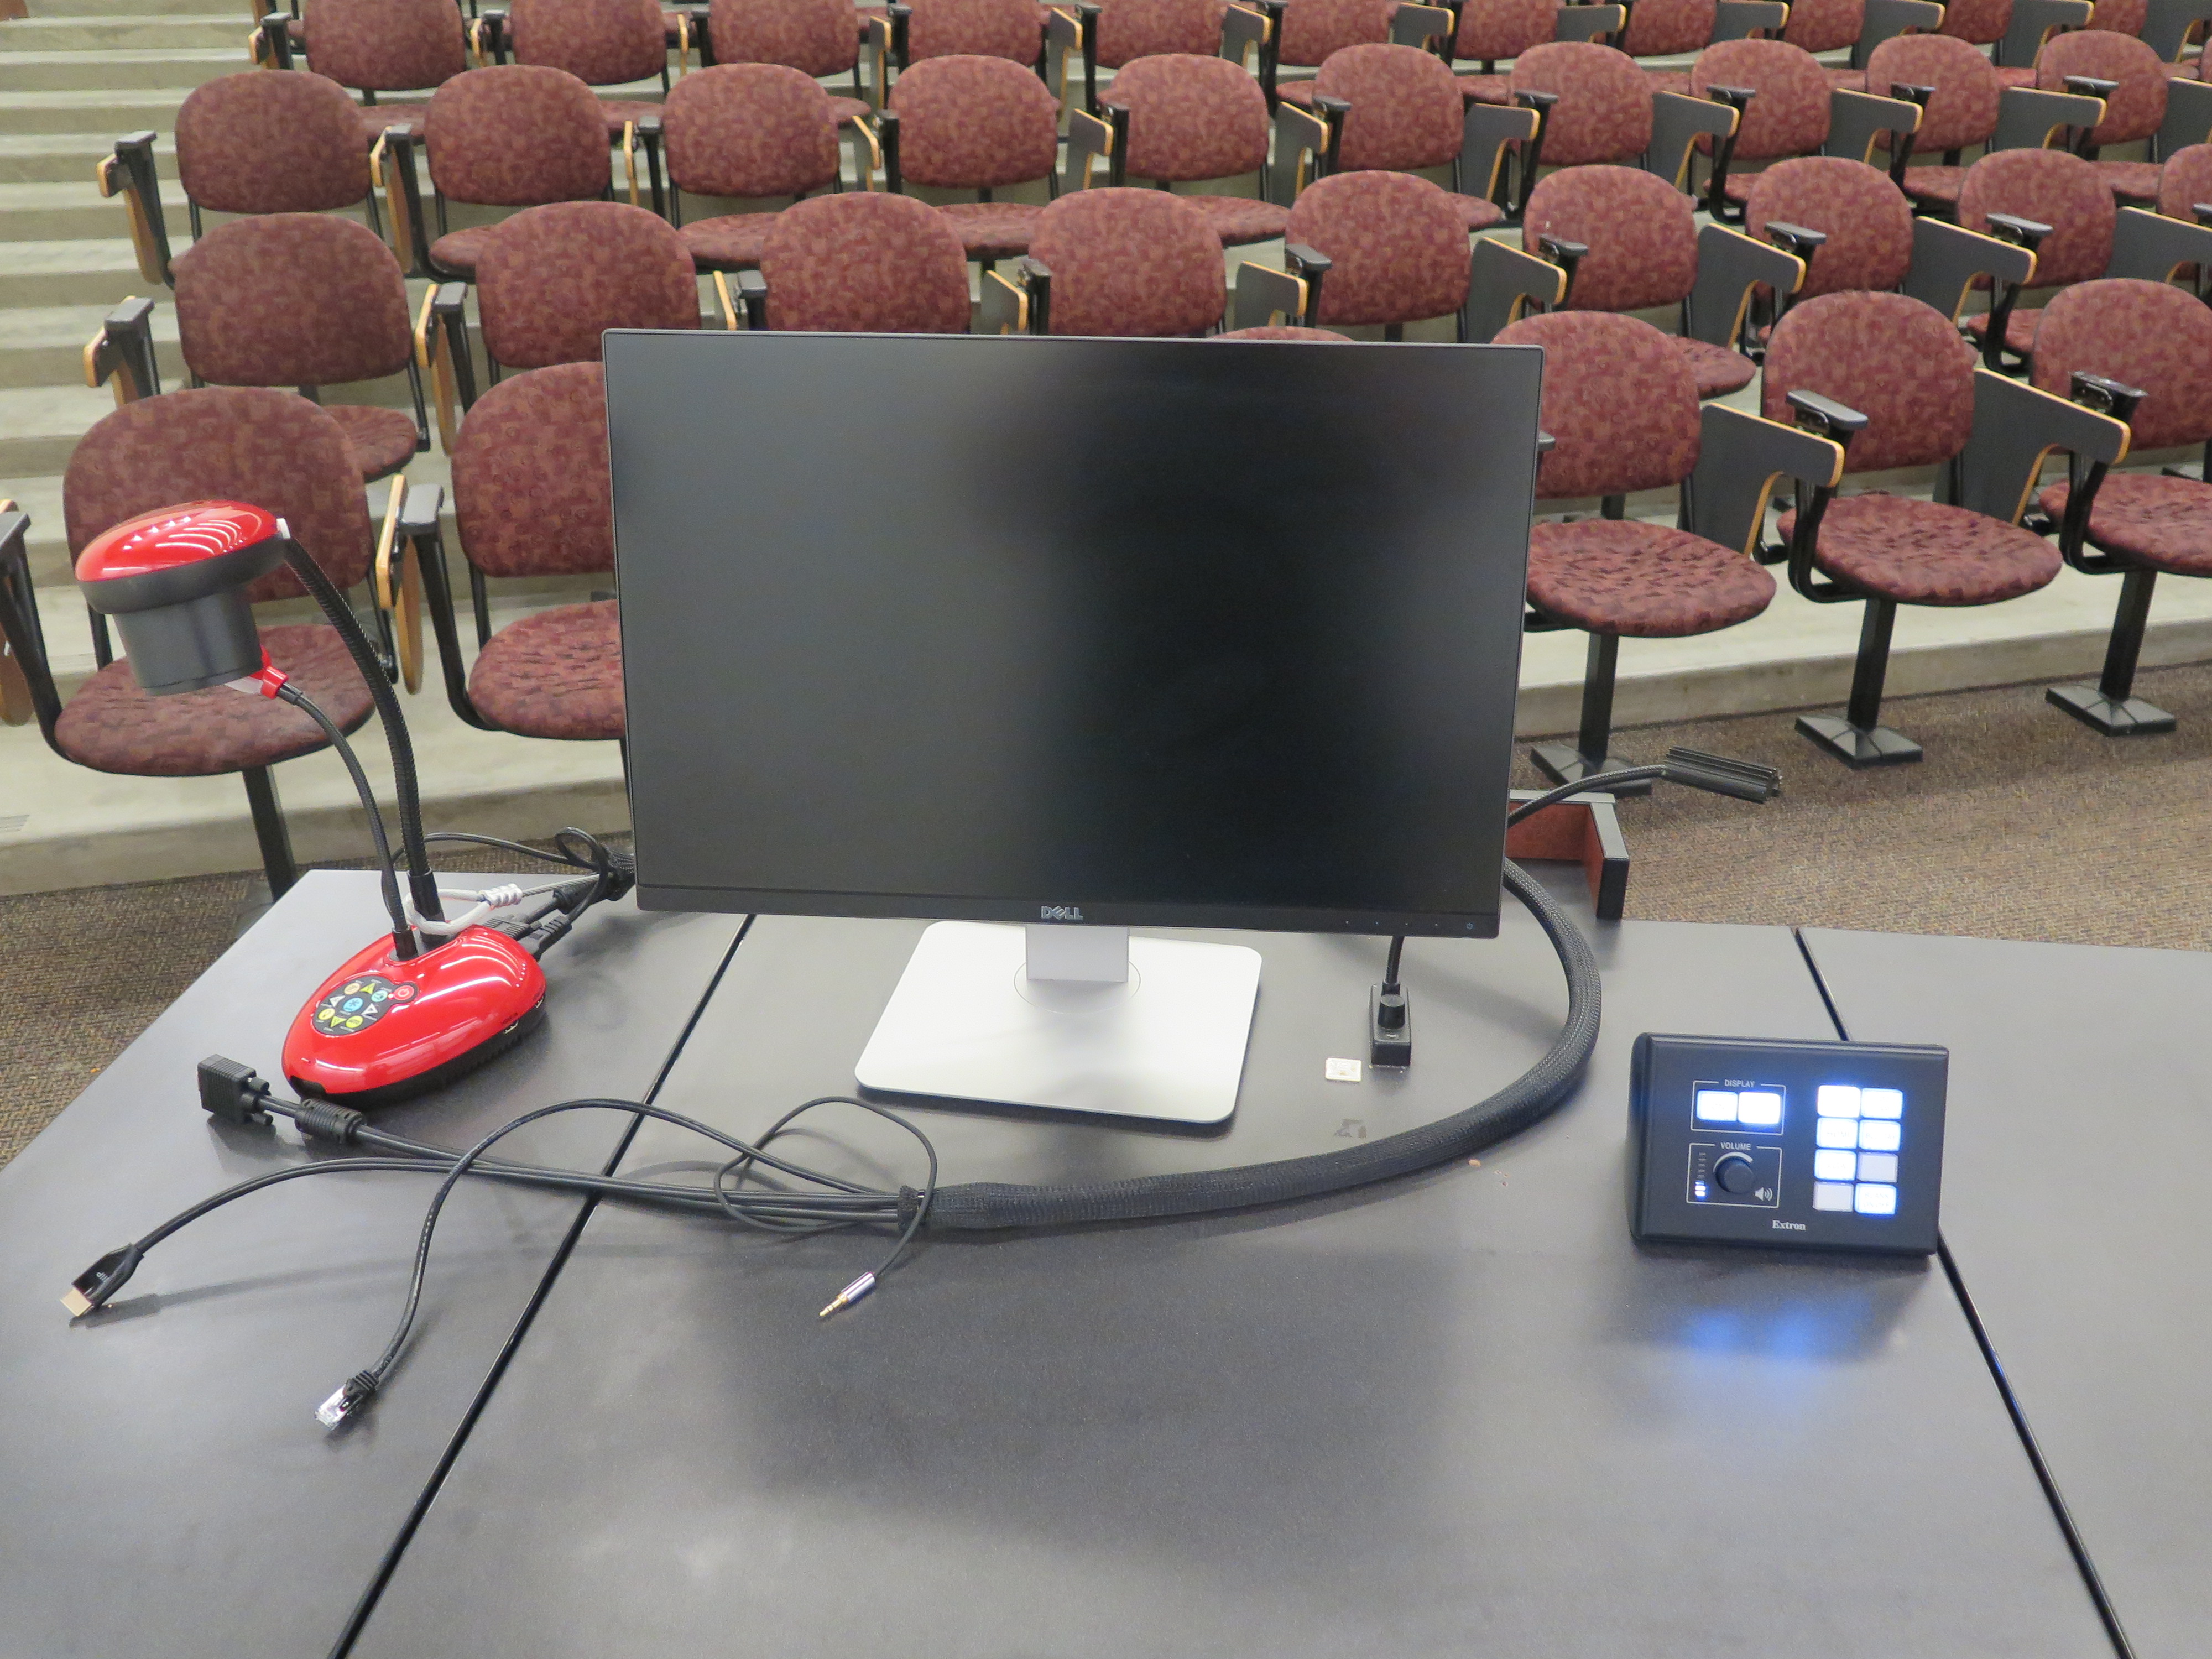 on top of podium is a dell computer monitor, AV push button controller, and lumins ladybug document camera